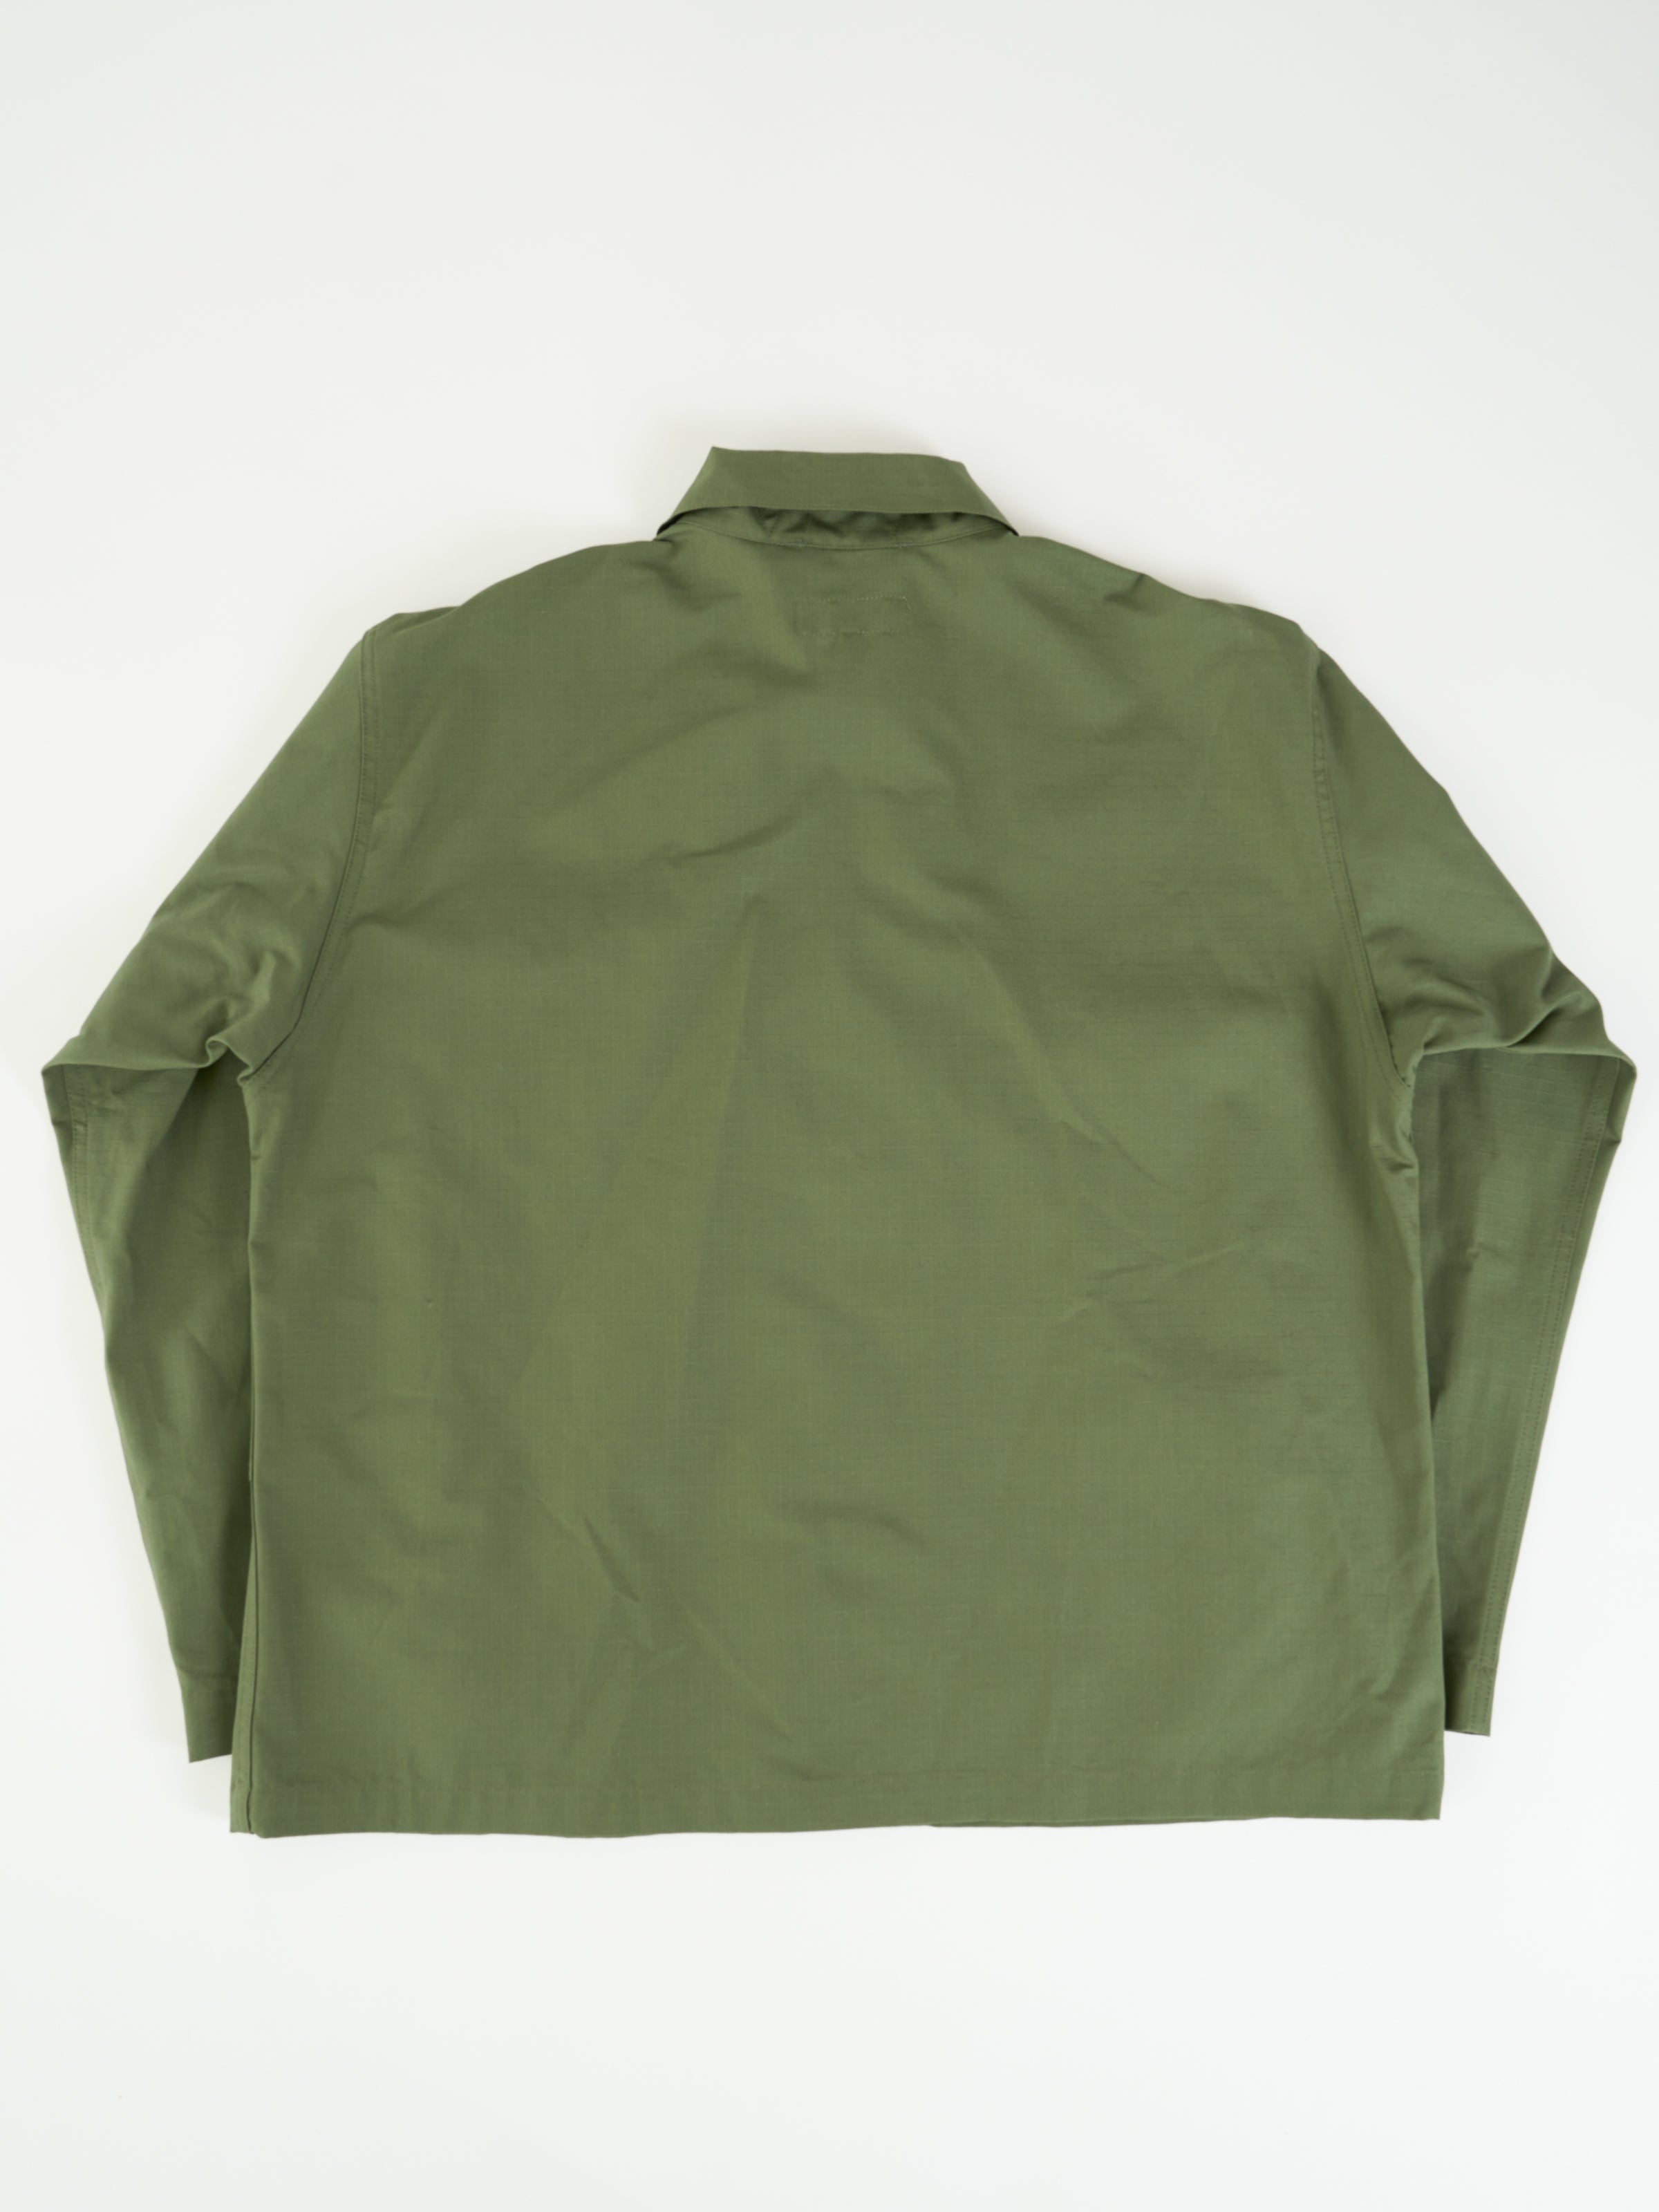 P44 Jacket - Olive Cotton Ripstop